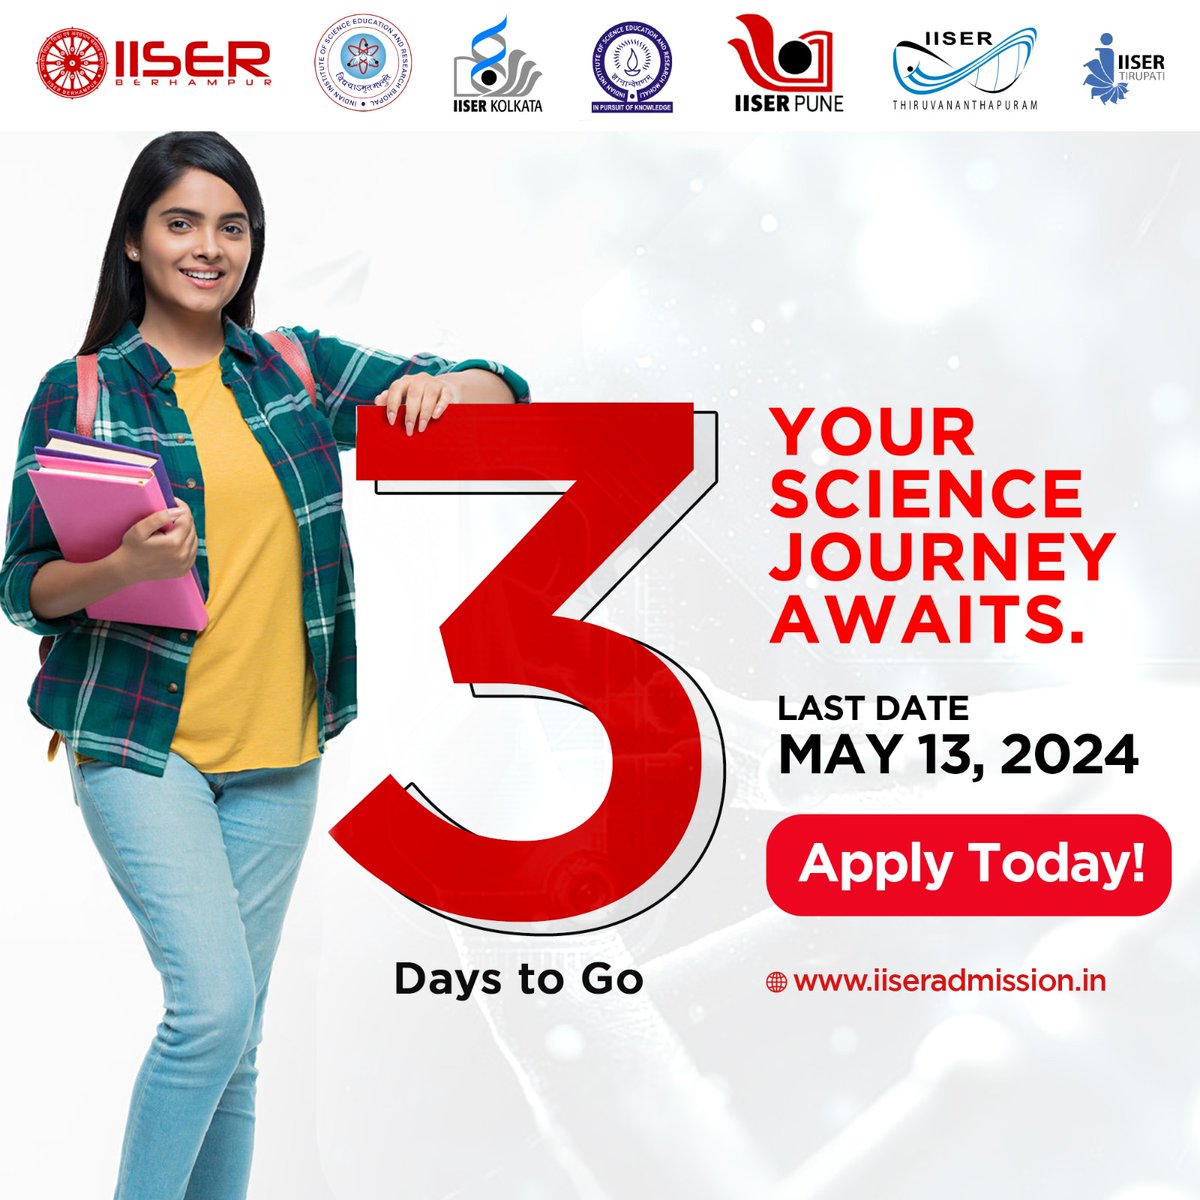 3 days left to make your mark! Apply now for the IISER Aptitude Test and unlock a world of scientific opportunity. 

Register by May 13th, 2024. For more details, visit iiseradmission.in

#IISERs #AdmissionsOpen #IAT2024 #ScienceEducation #Research #BSMS #Opportunity